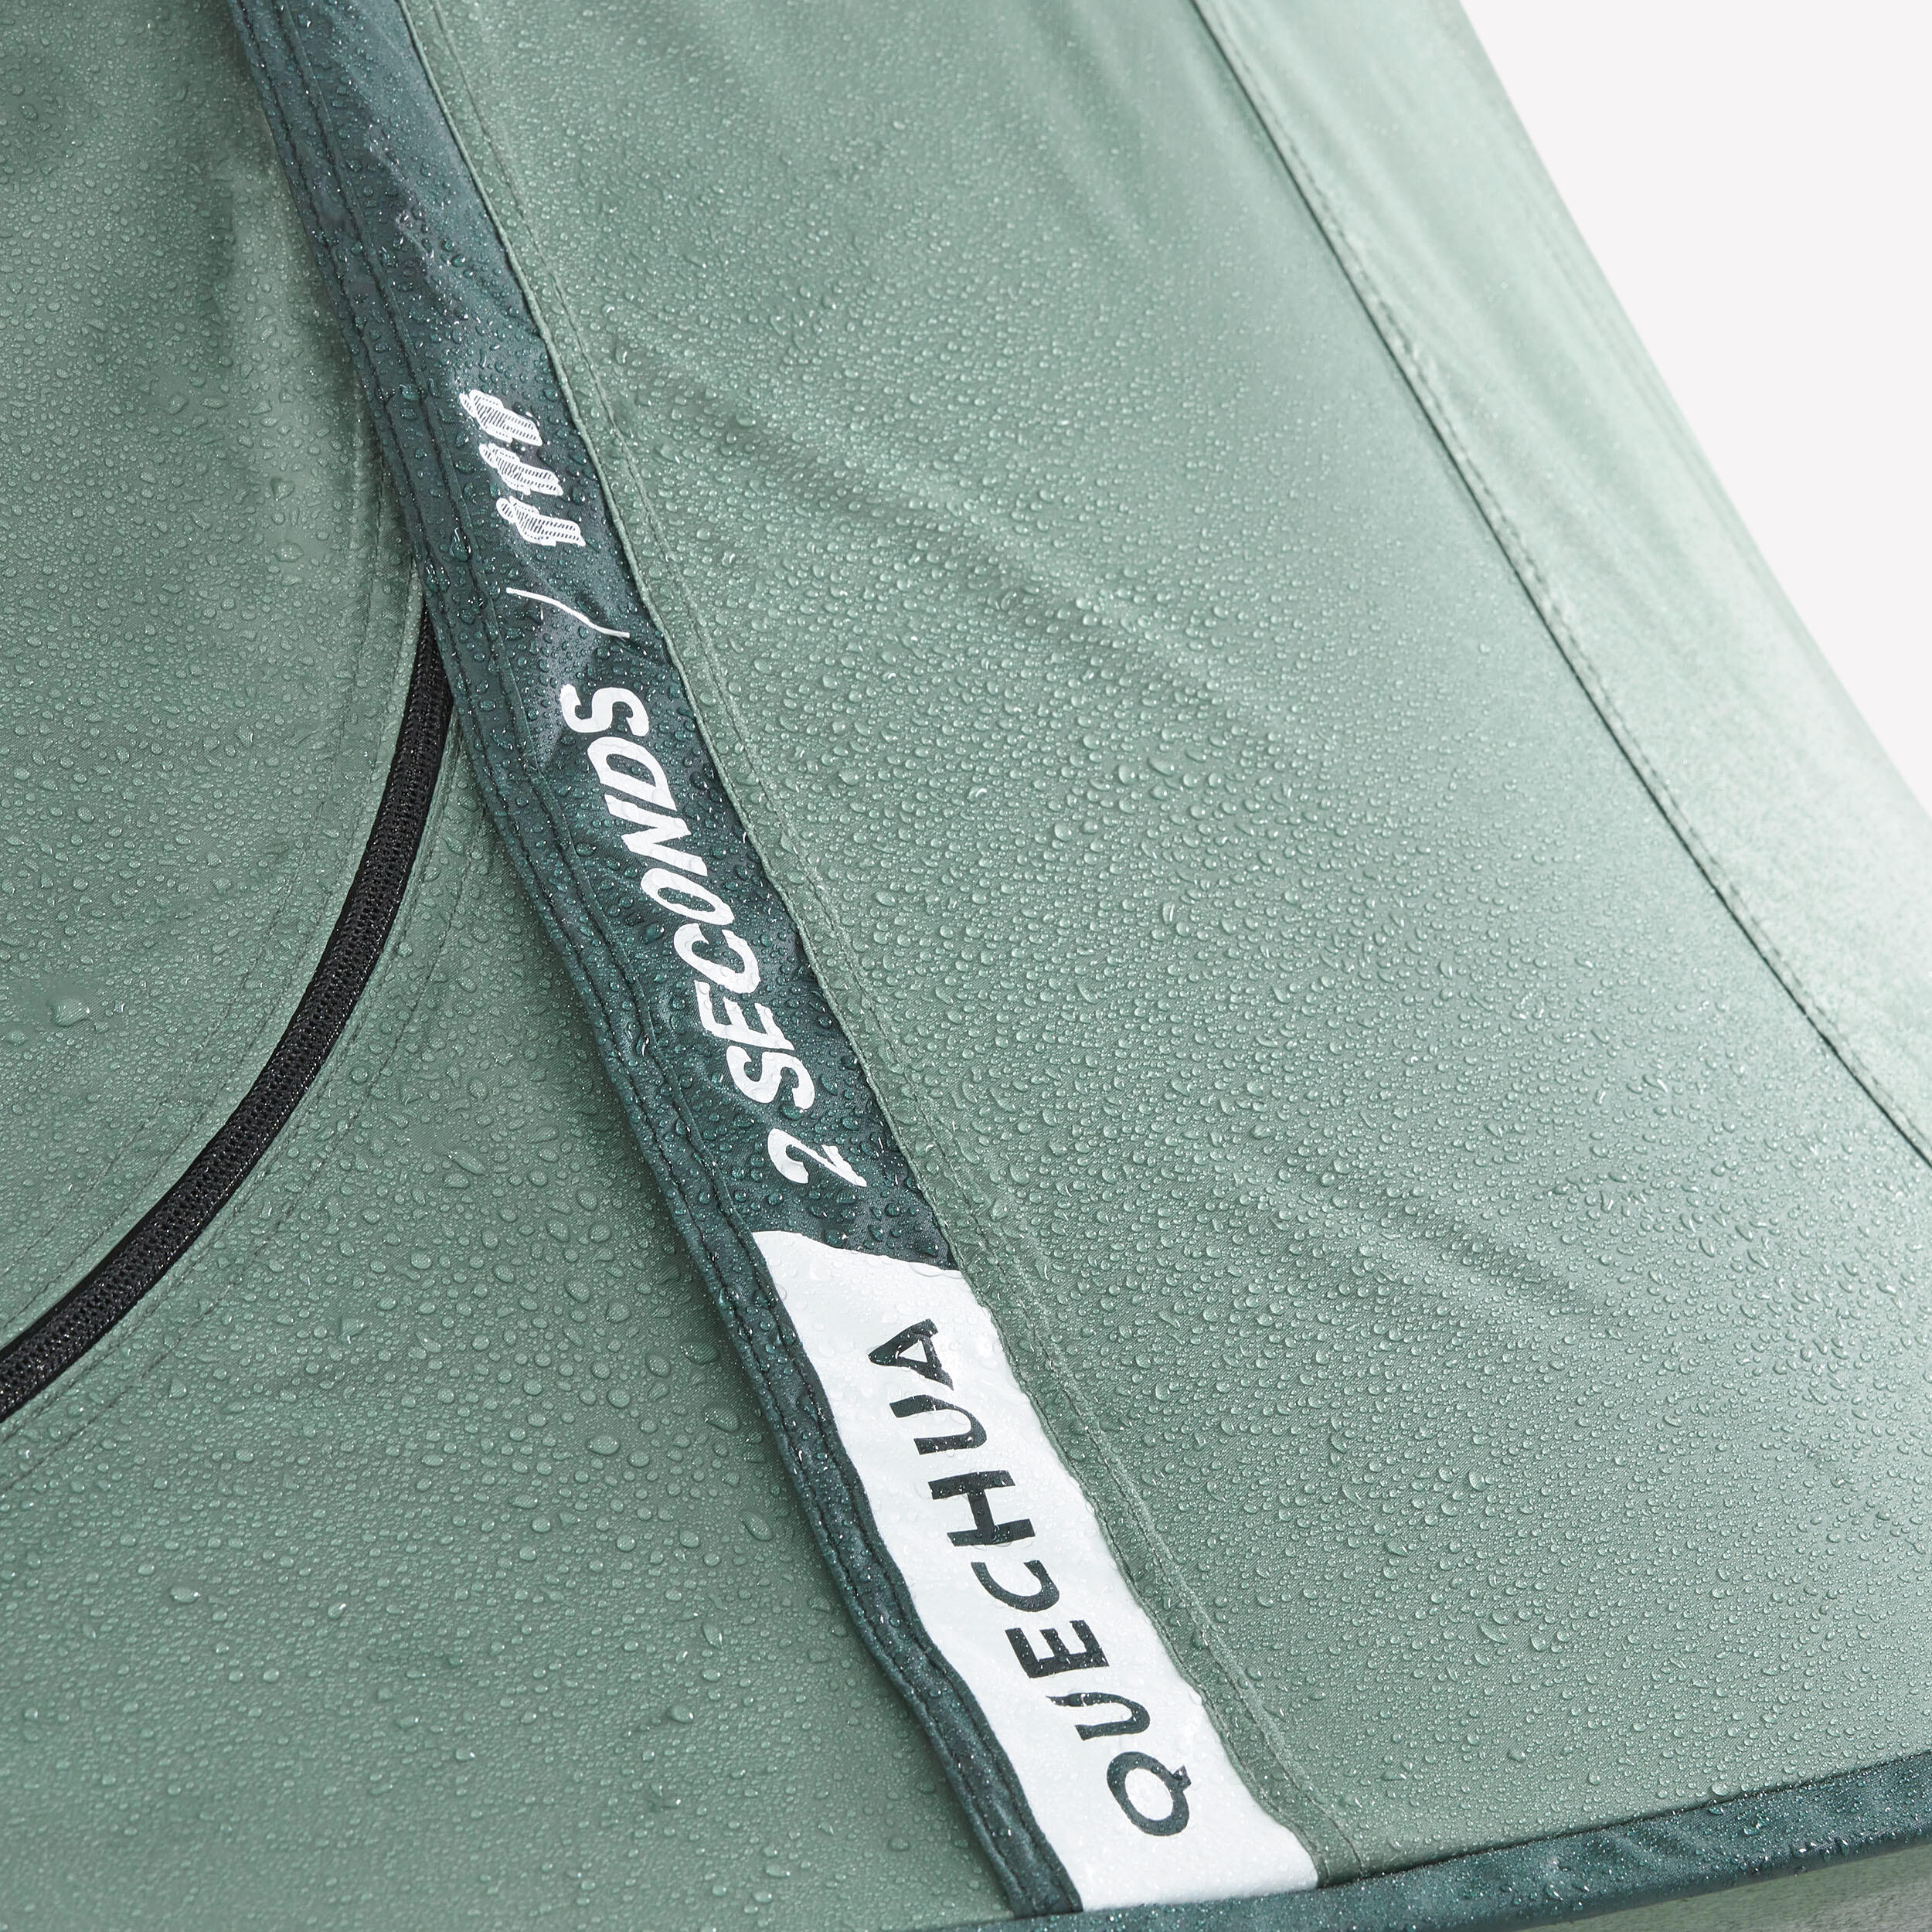 Camping tent - 2 SECONDS - 3-person 5/11